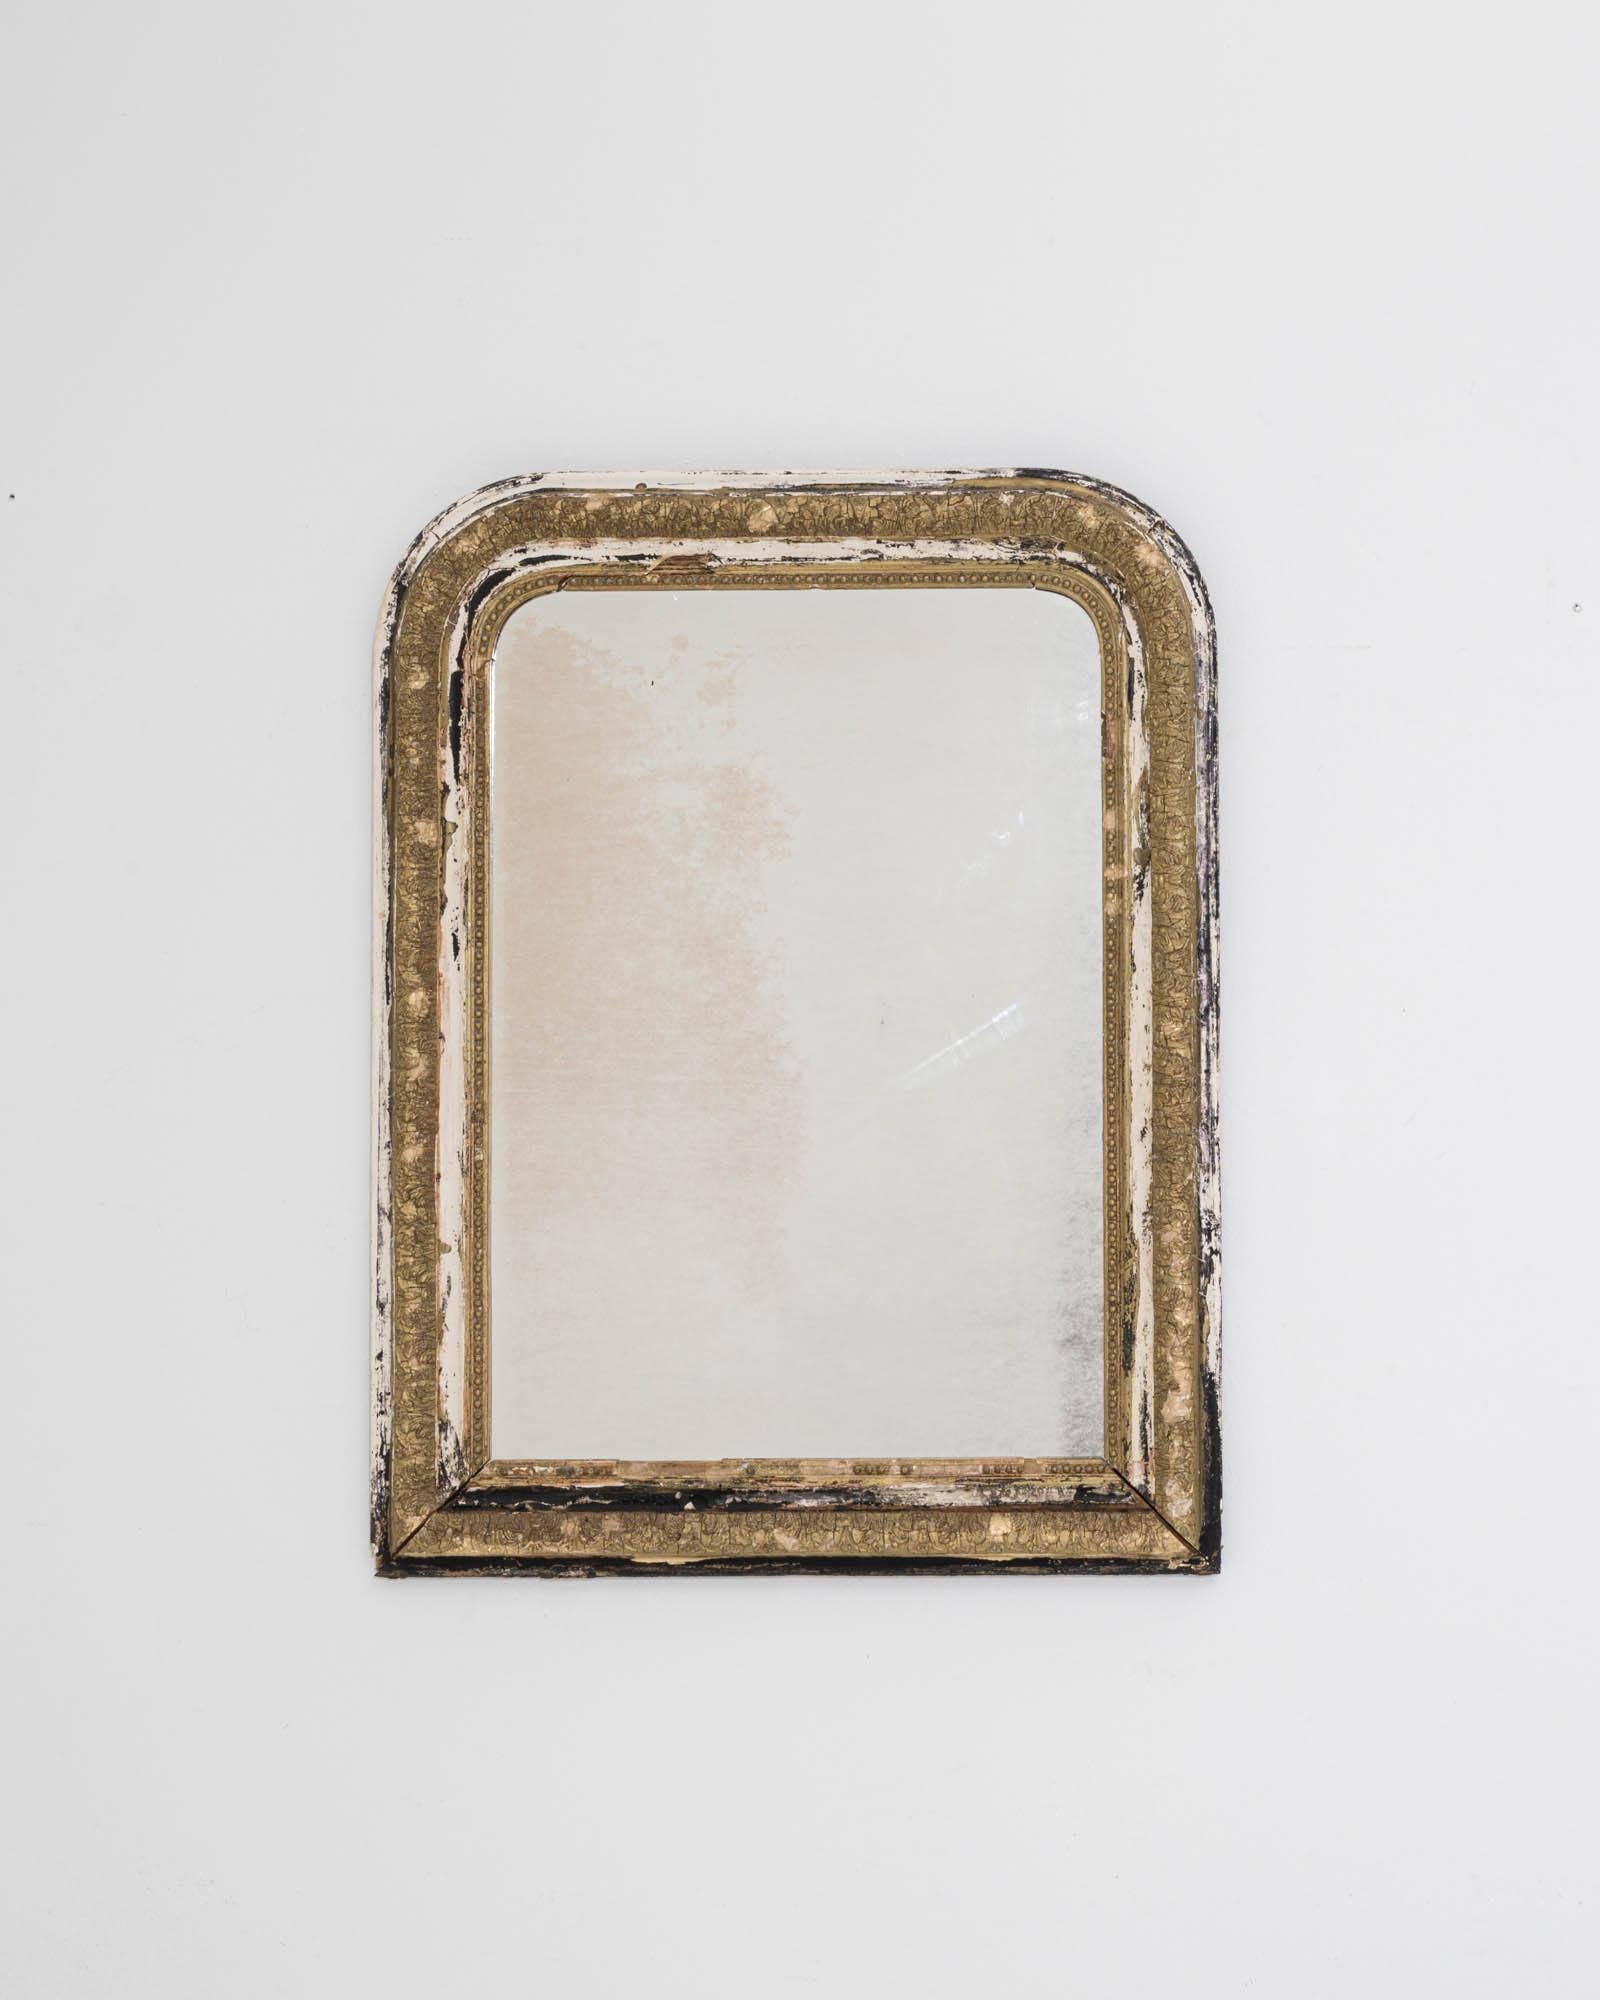 A giltwood mirror created in 19th century France. This one of a kind mirror combines traditional design with a timeless sensibility. The rich patina that coats its frame has slowly ebbed away, creating a collage of materials, colors, and time. The